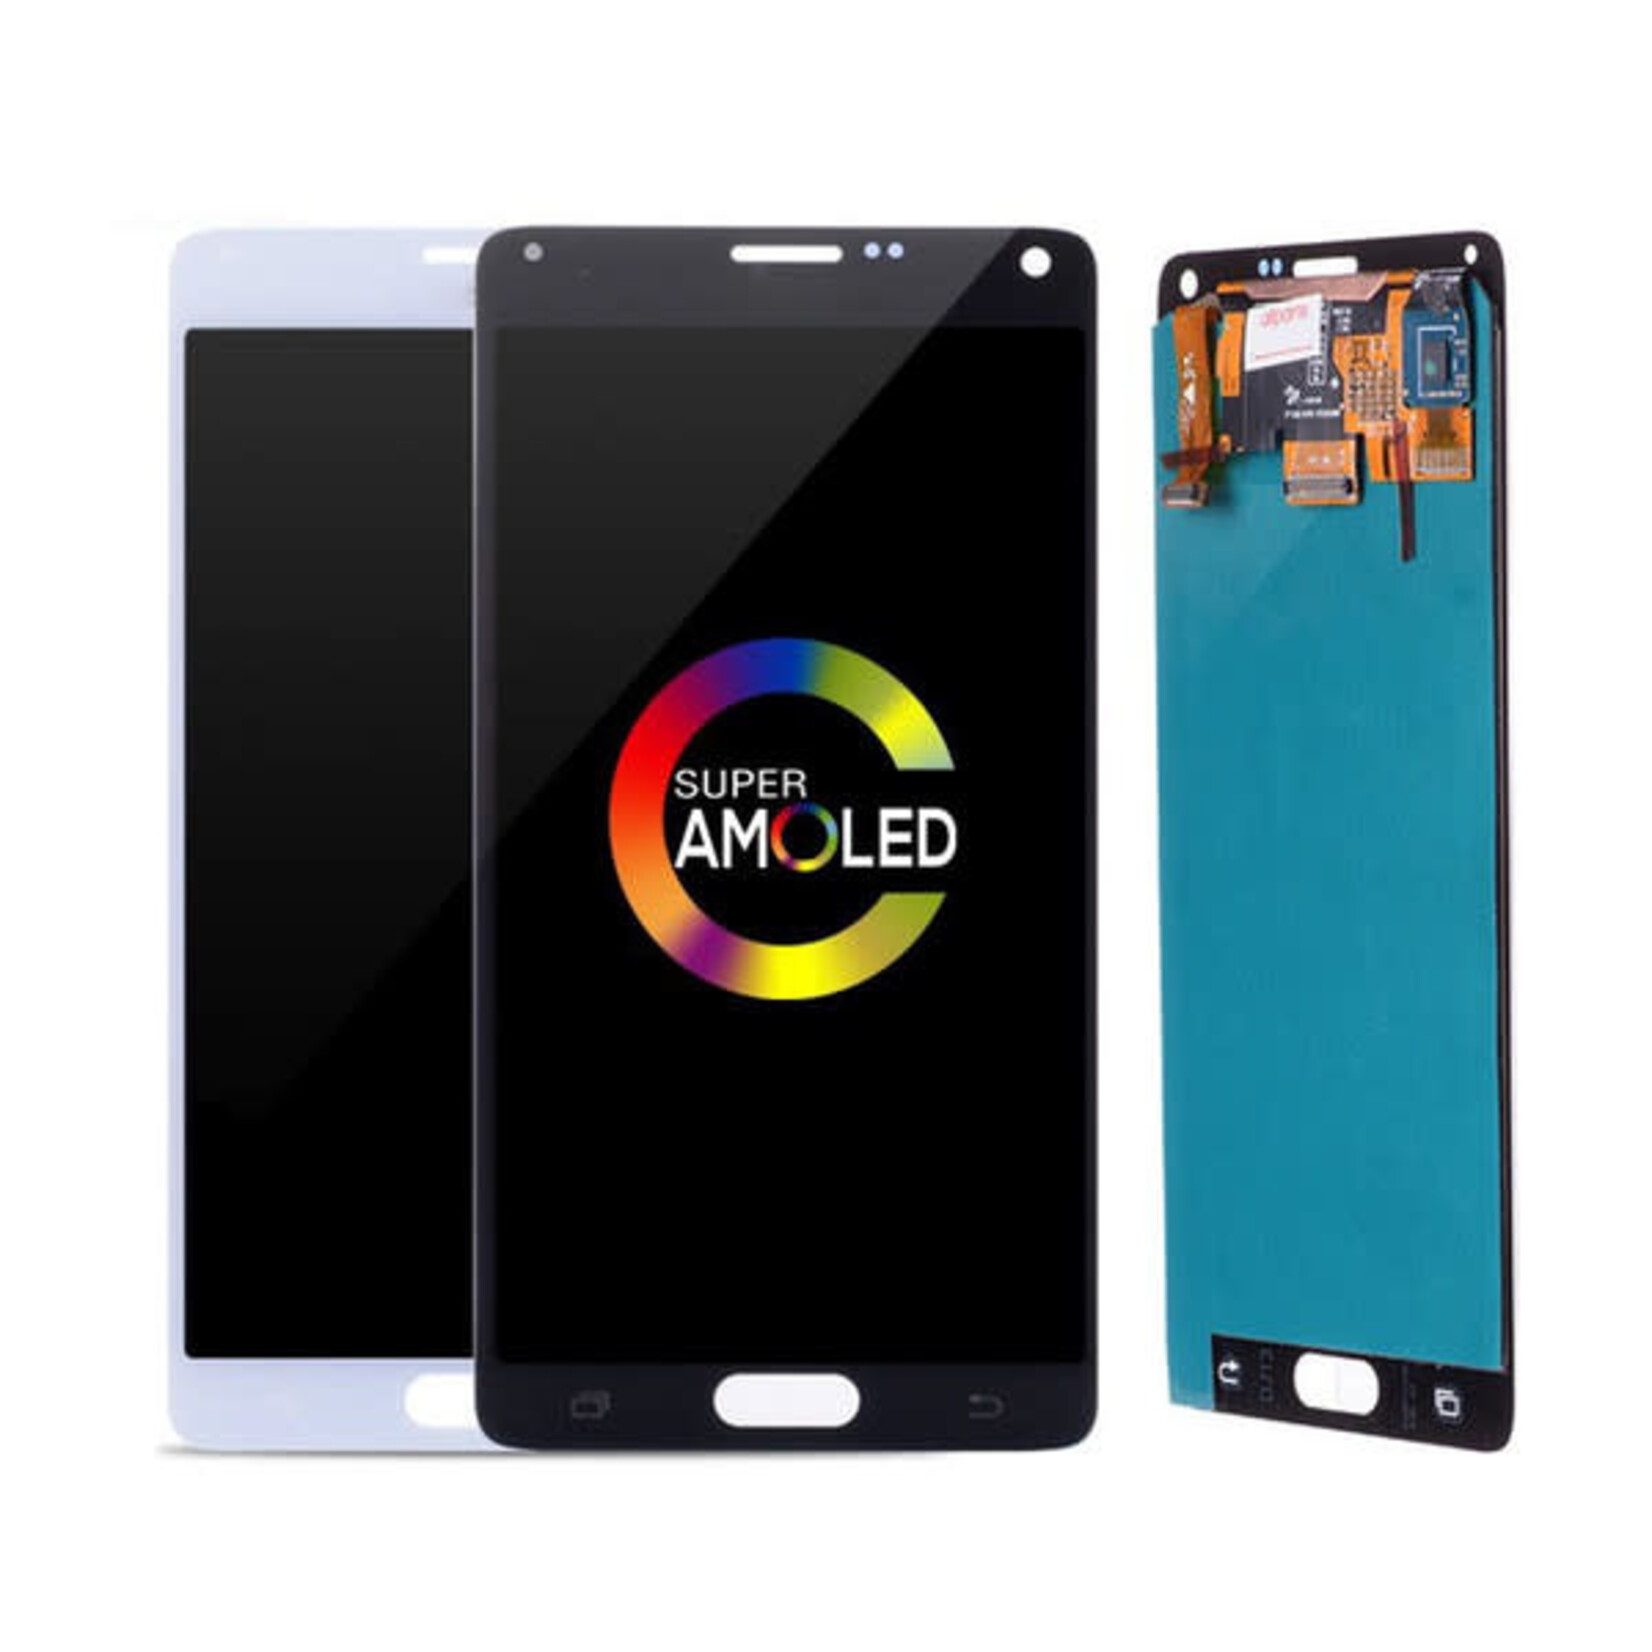 Samsung LCD DIGITIZER ASSEMBLY FOR SAMSUNG GALAXY NOTE 4